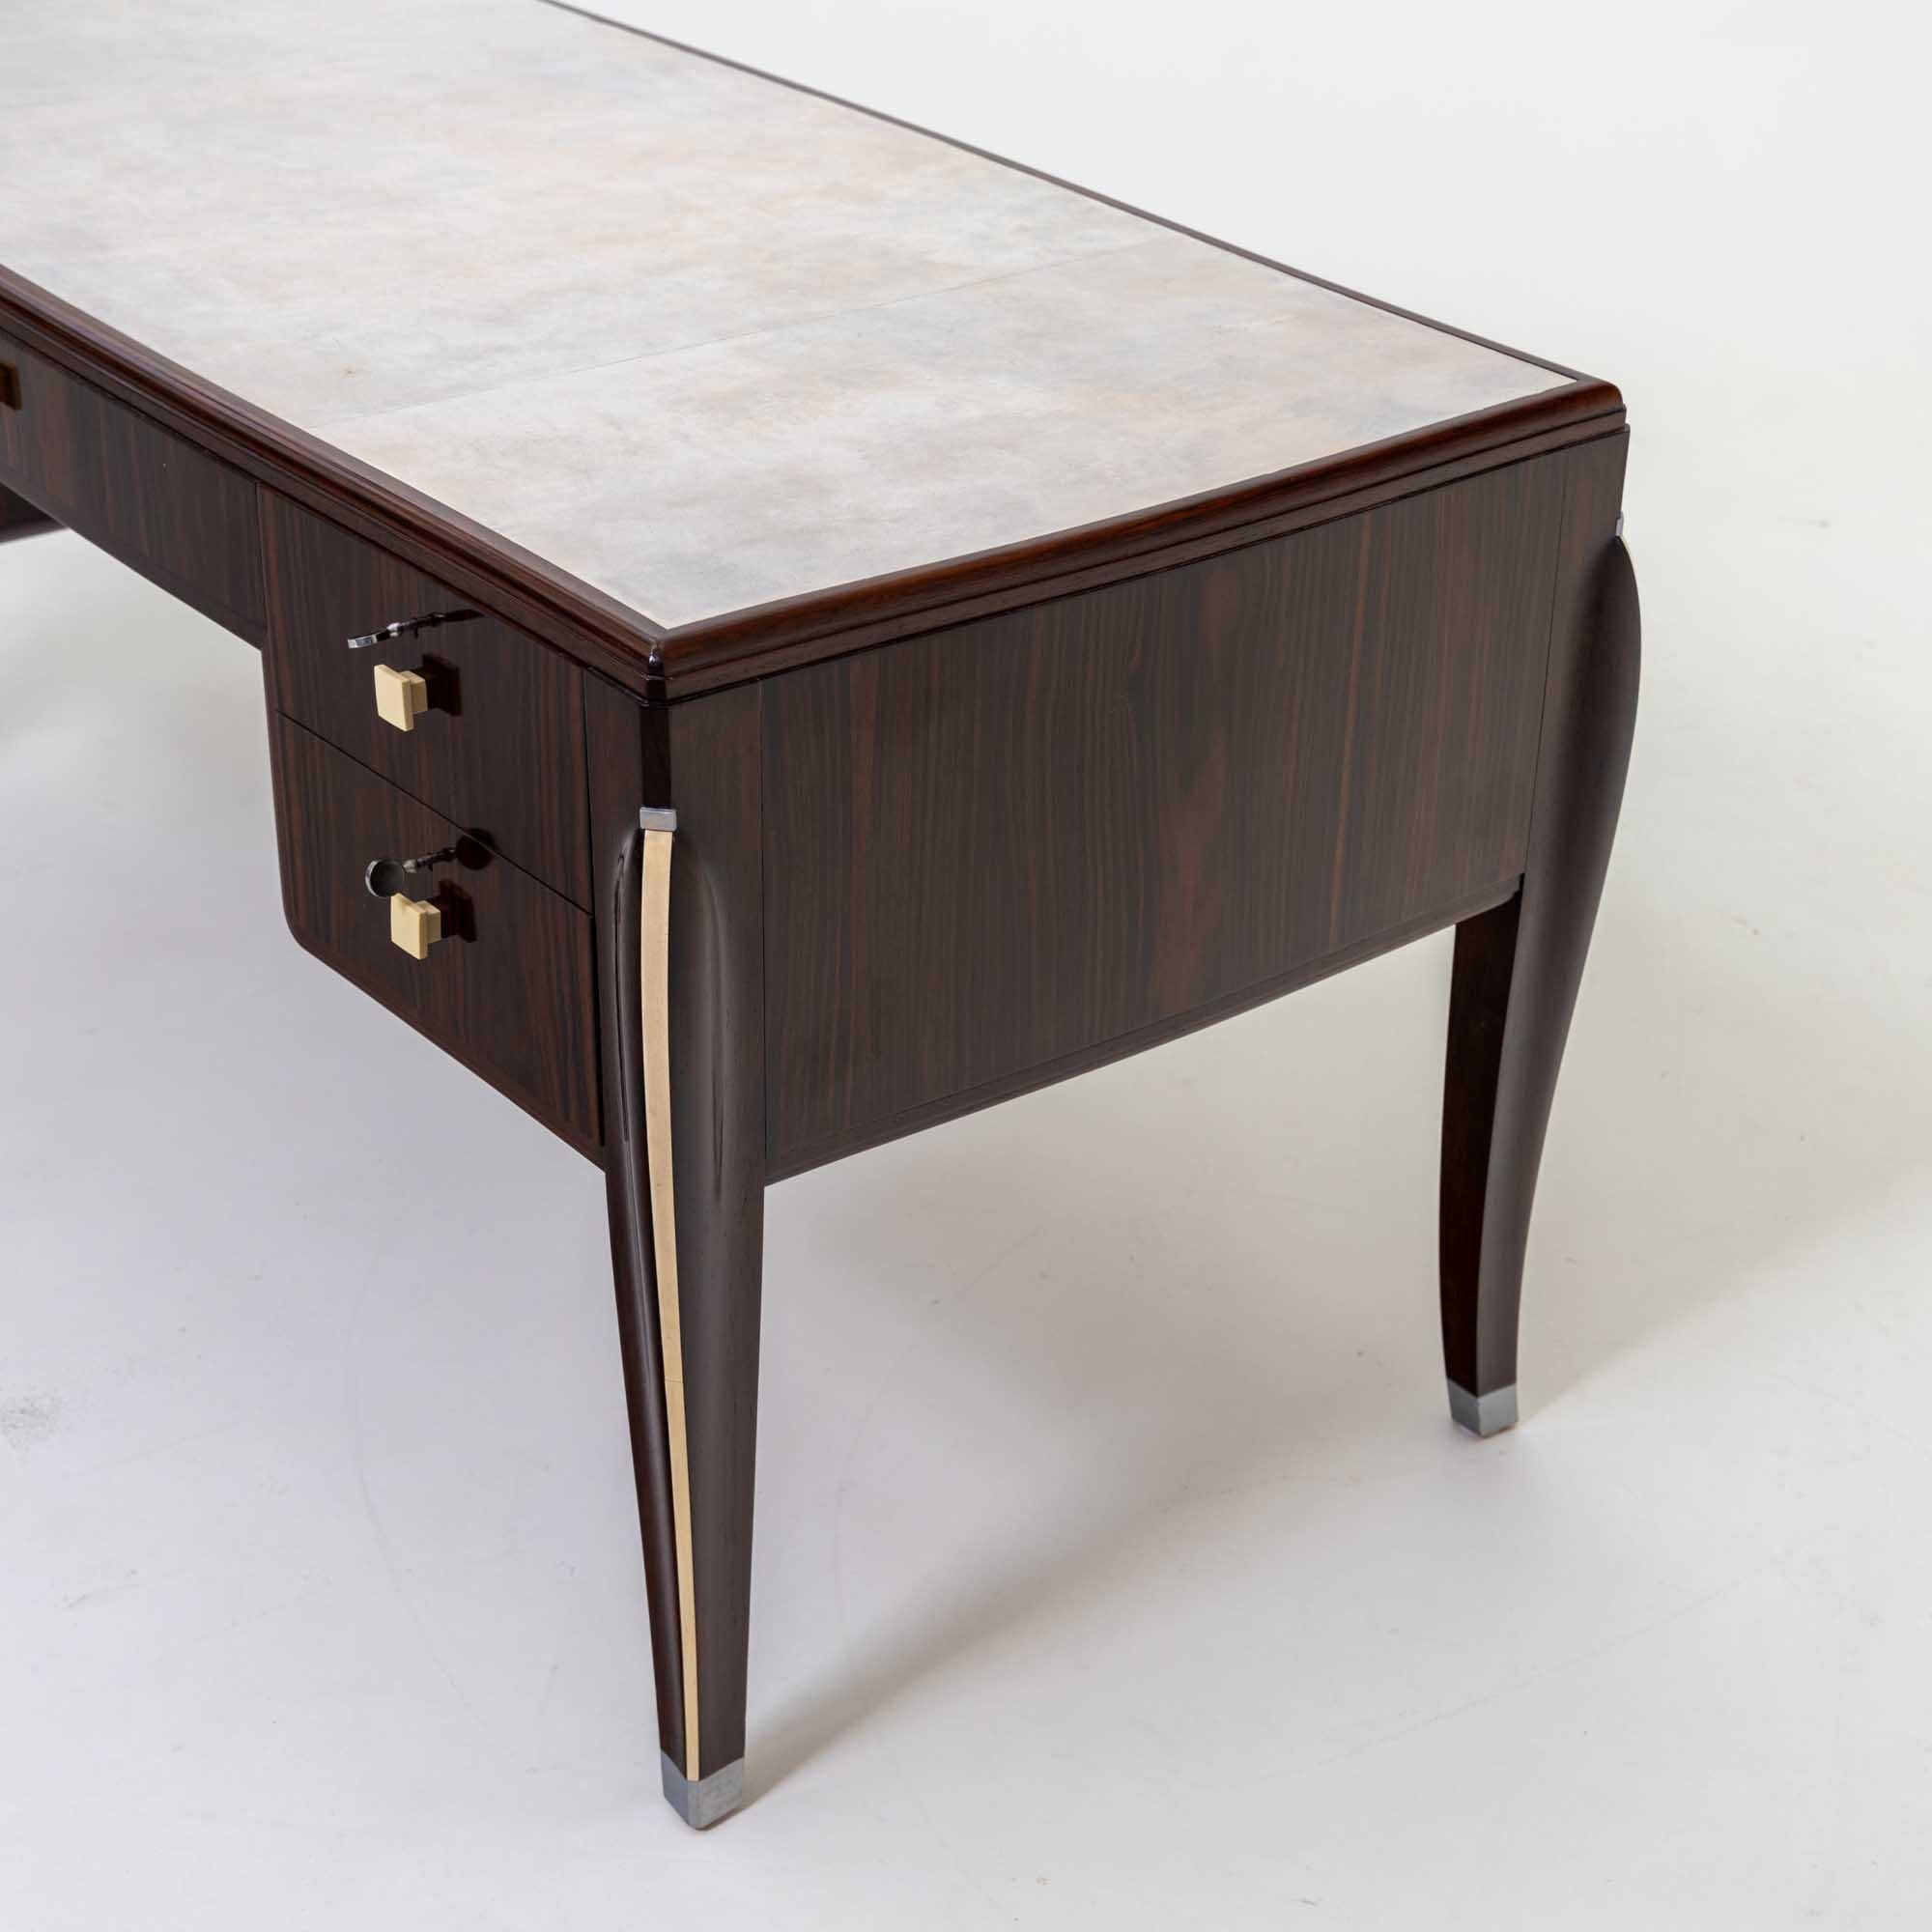 Art Deco Desk in the style of Jacques-Emile Ruhlmann (1879-1933), France, 1920s For Sale 11